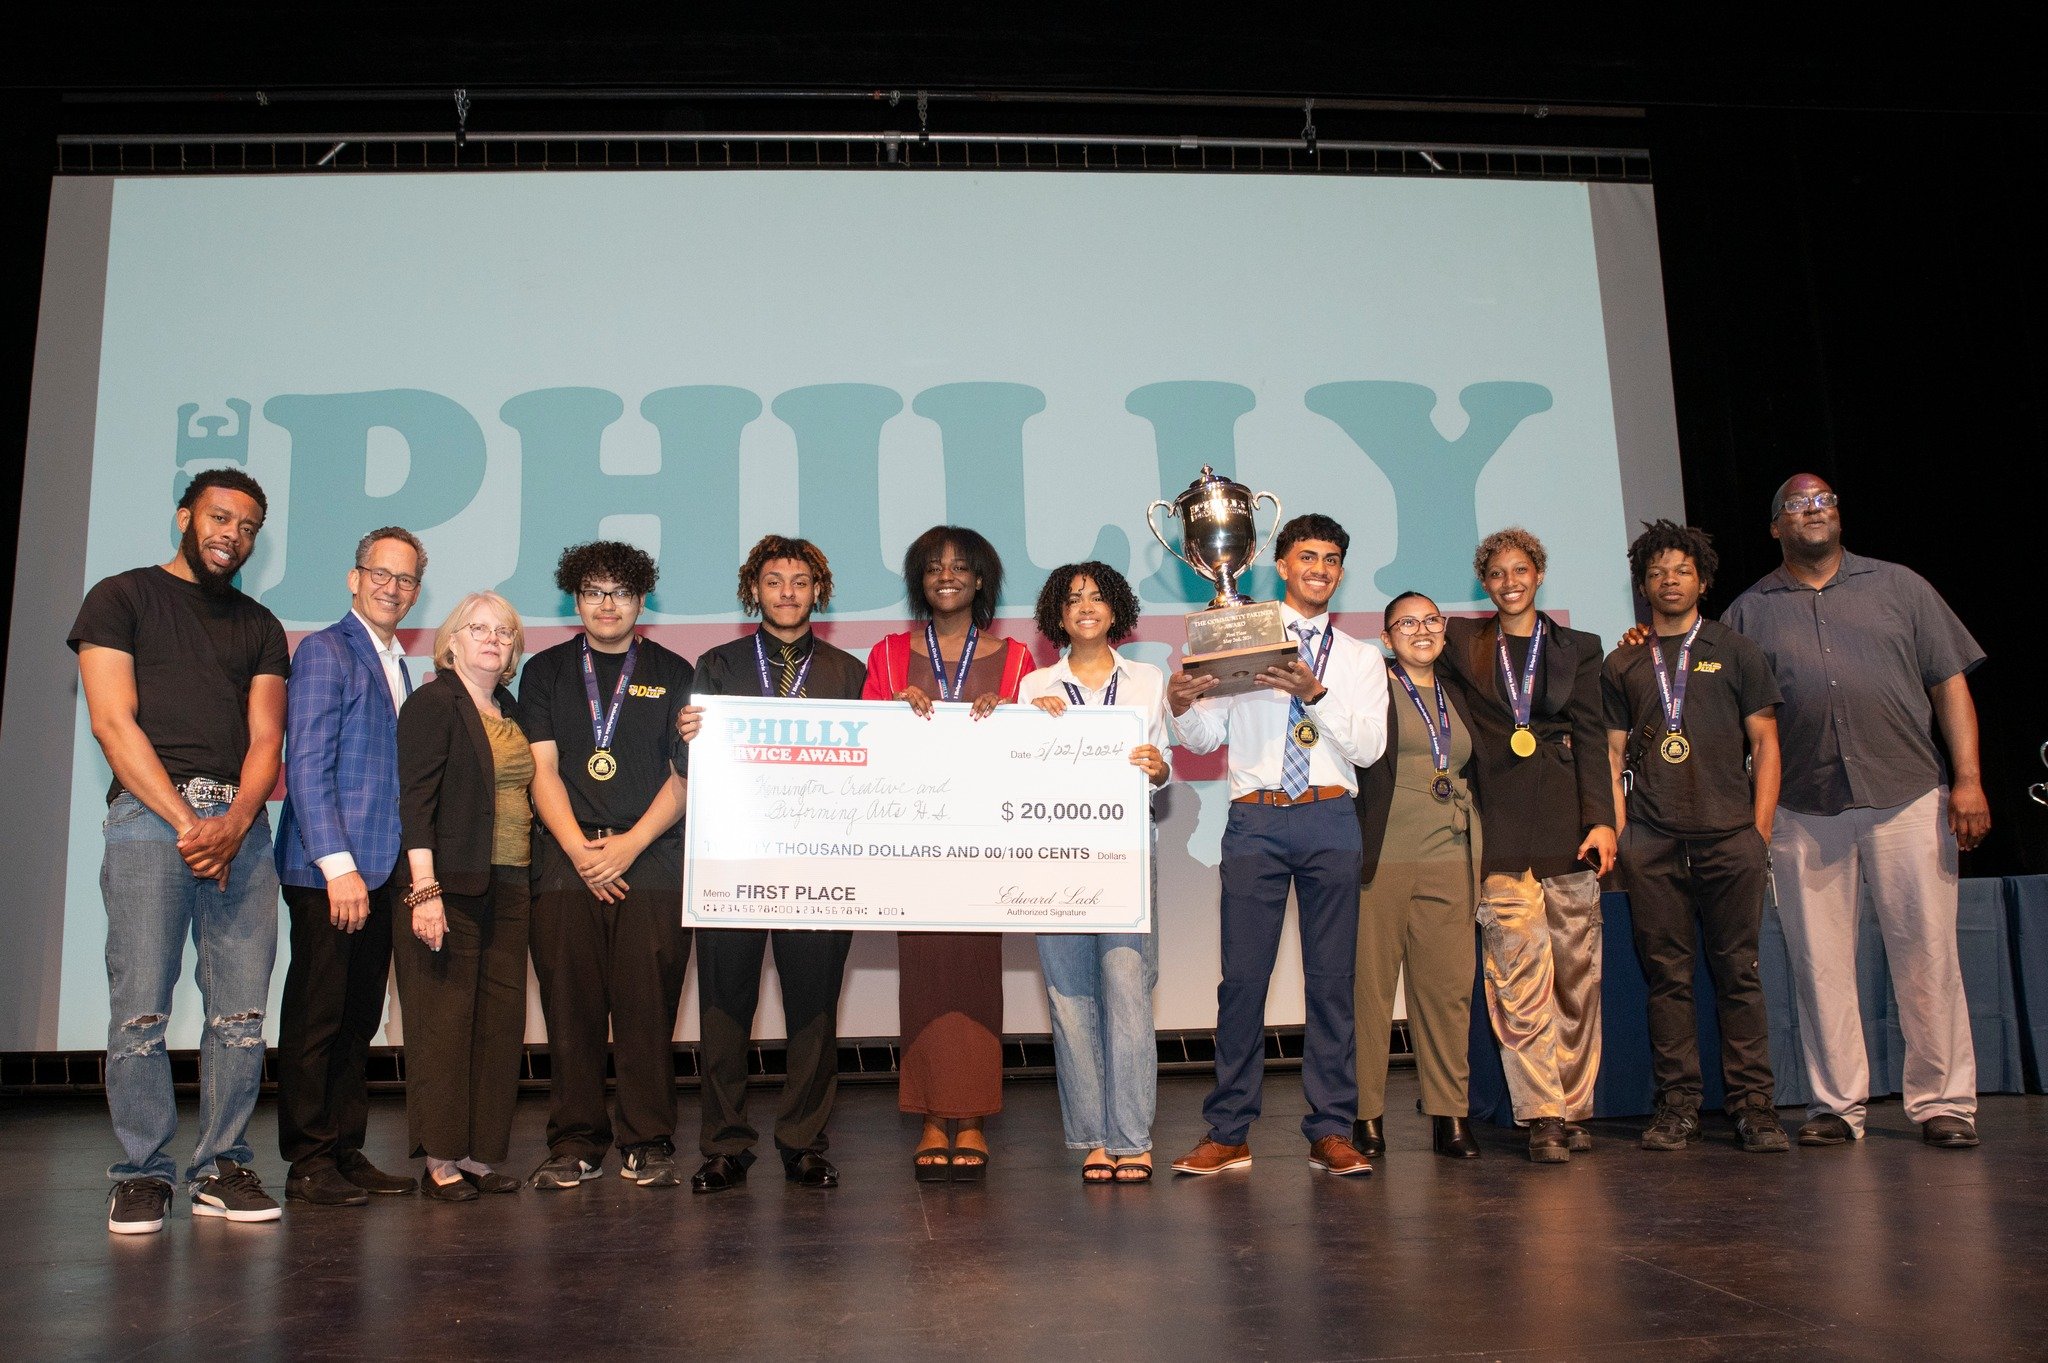 Kensington Creative and Performing Arts High School was awarded The Community Partner Award and a $20,000 prize for their incredible project &quot;The Beauty of Time.&quot;

The Community Partner Award is designated for the school that went above and